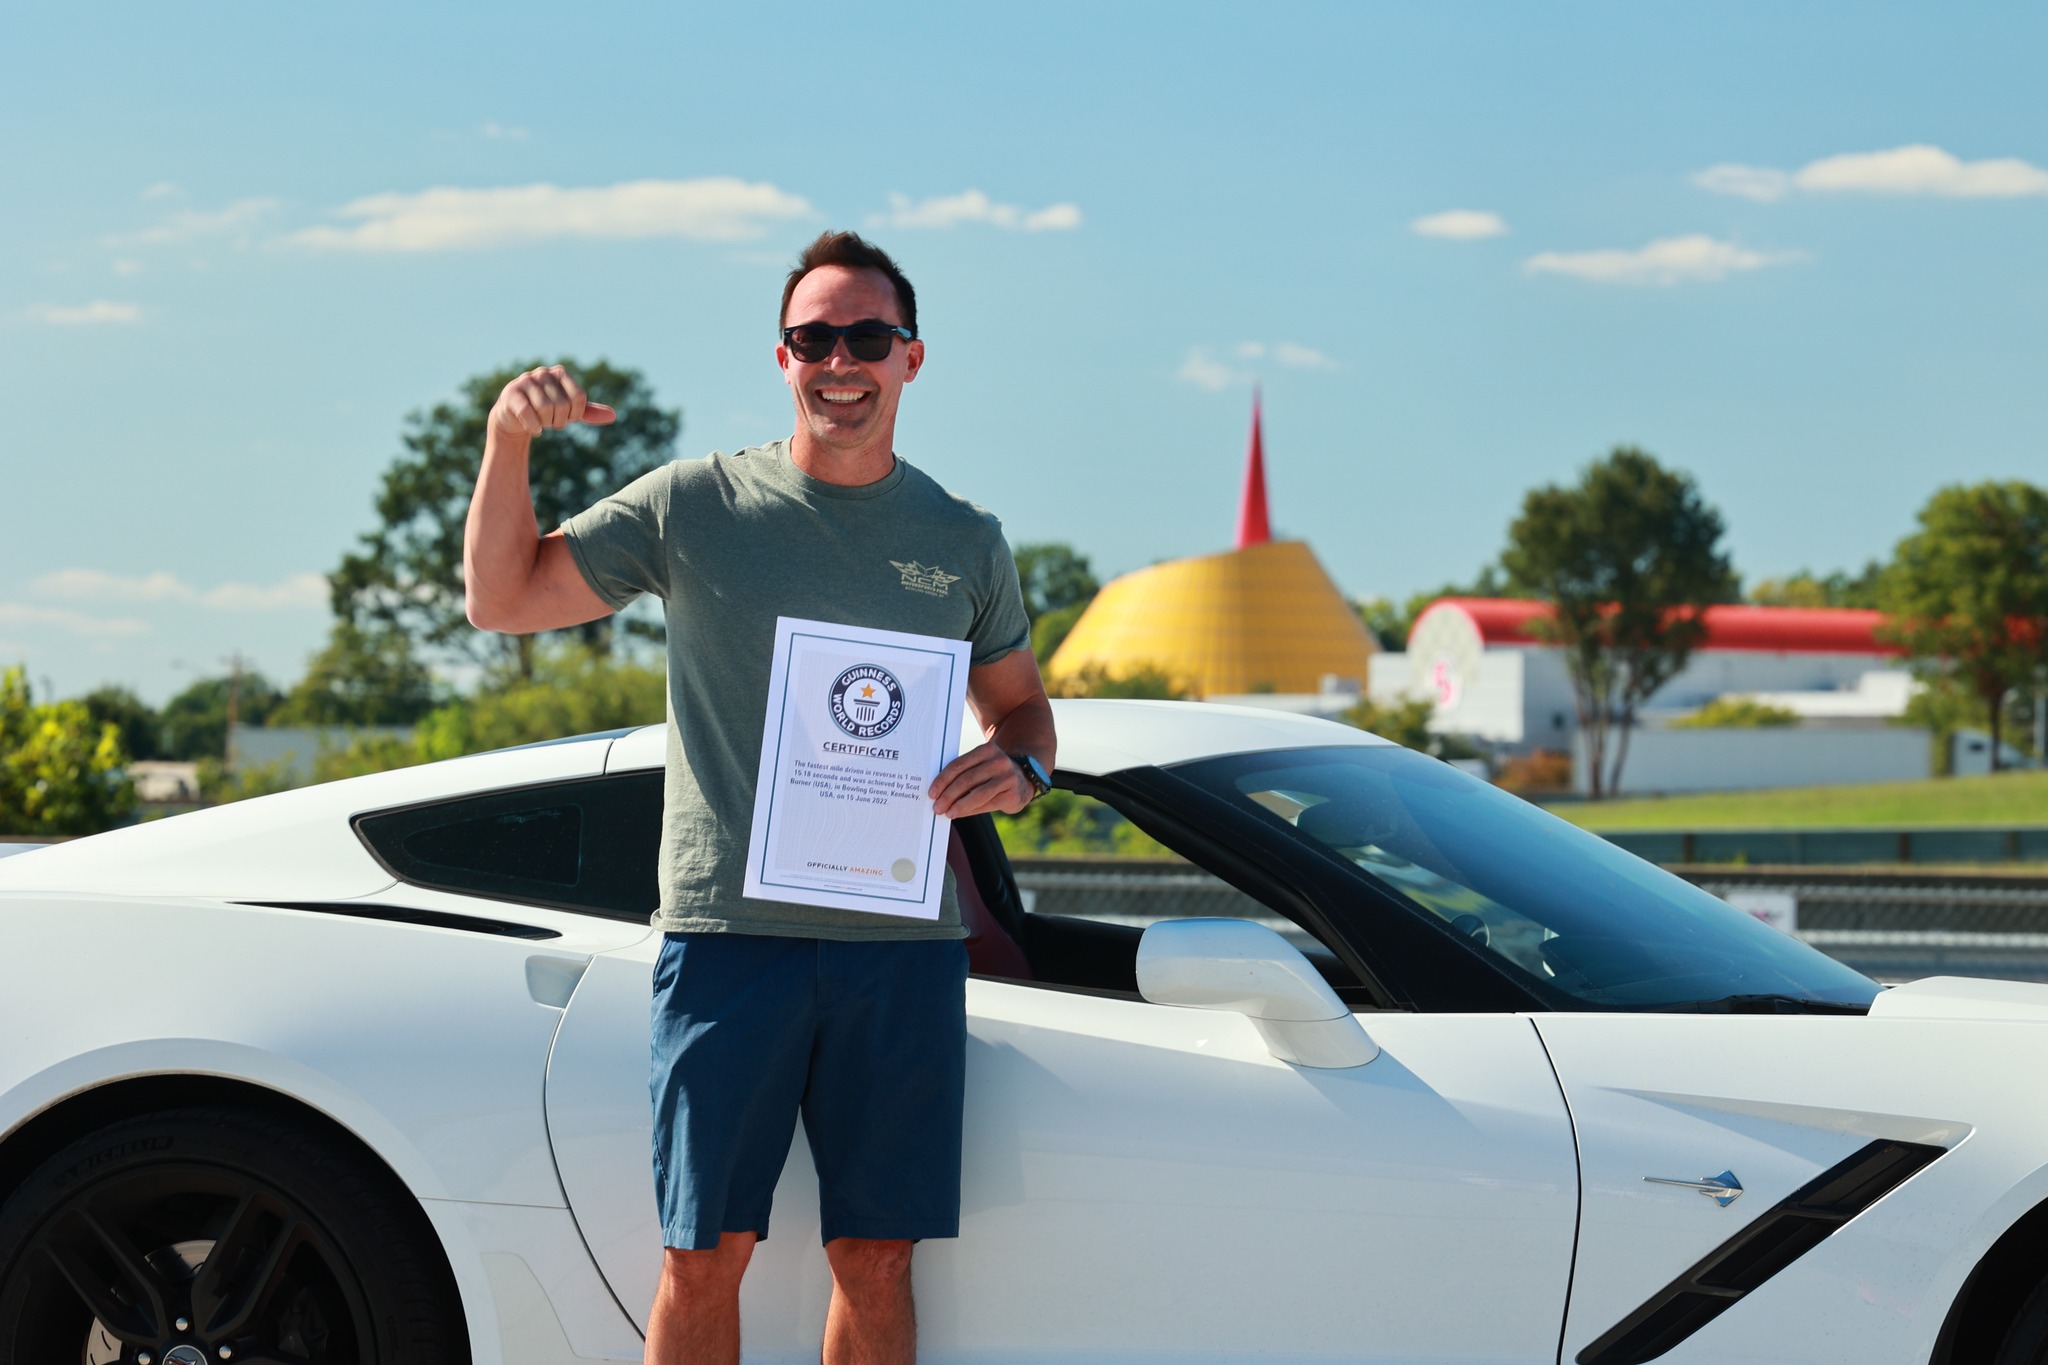 Guinness World Record set at 11518 for fastest mile driven